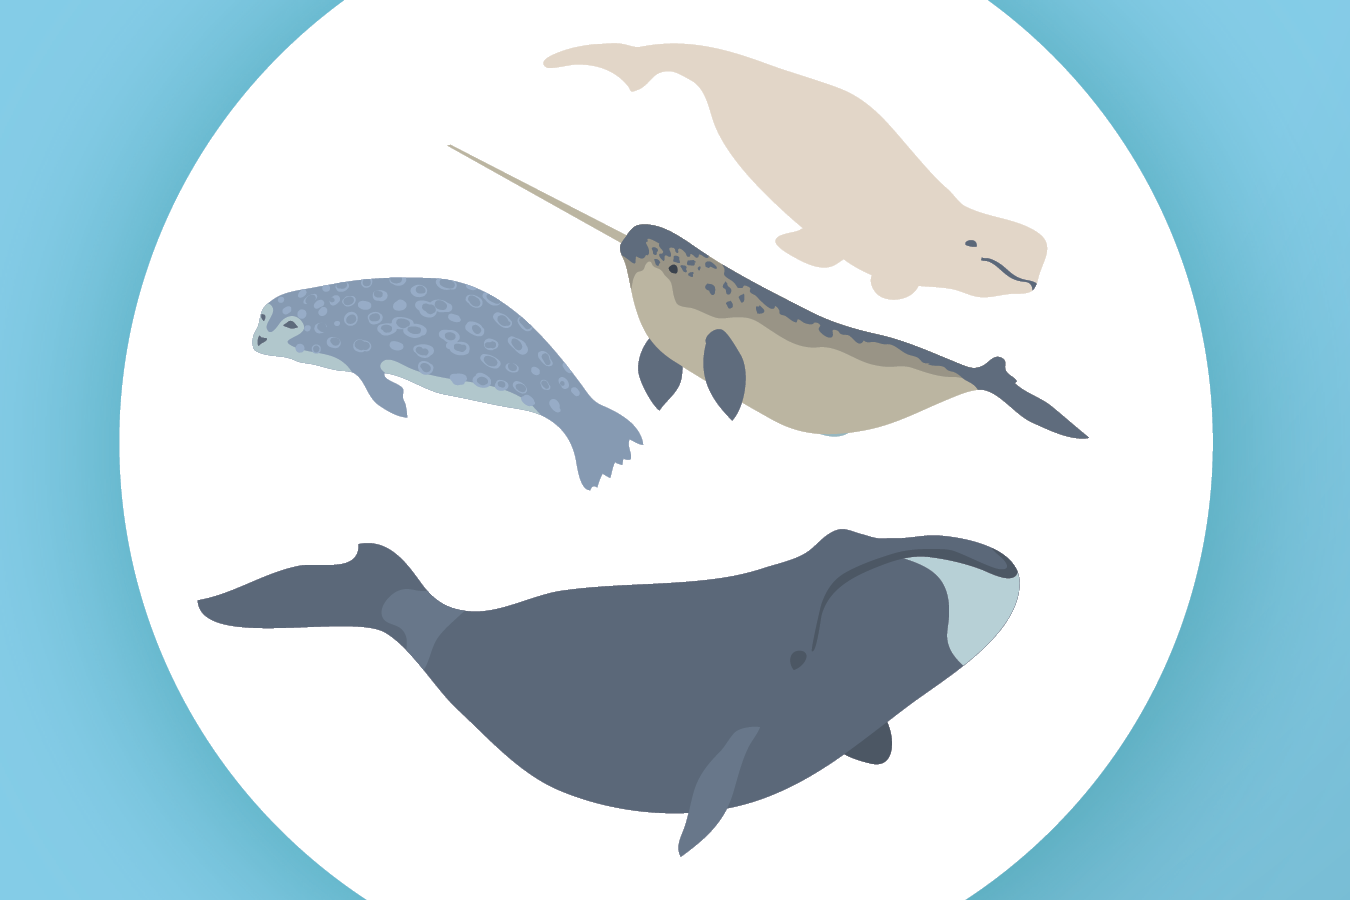 Arctic marine mammal include whales, belugas, seals, and narwhals